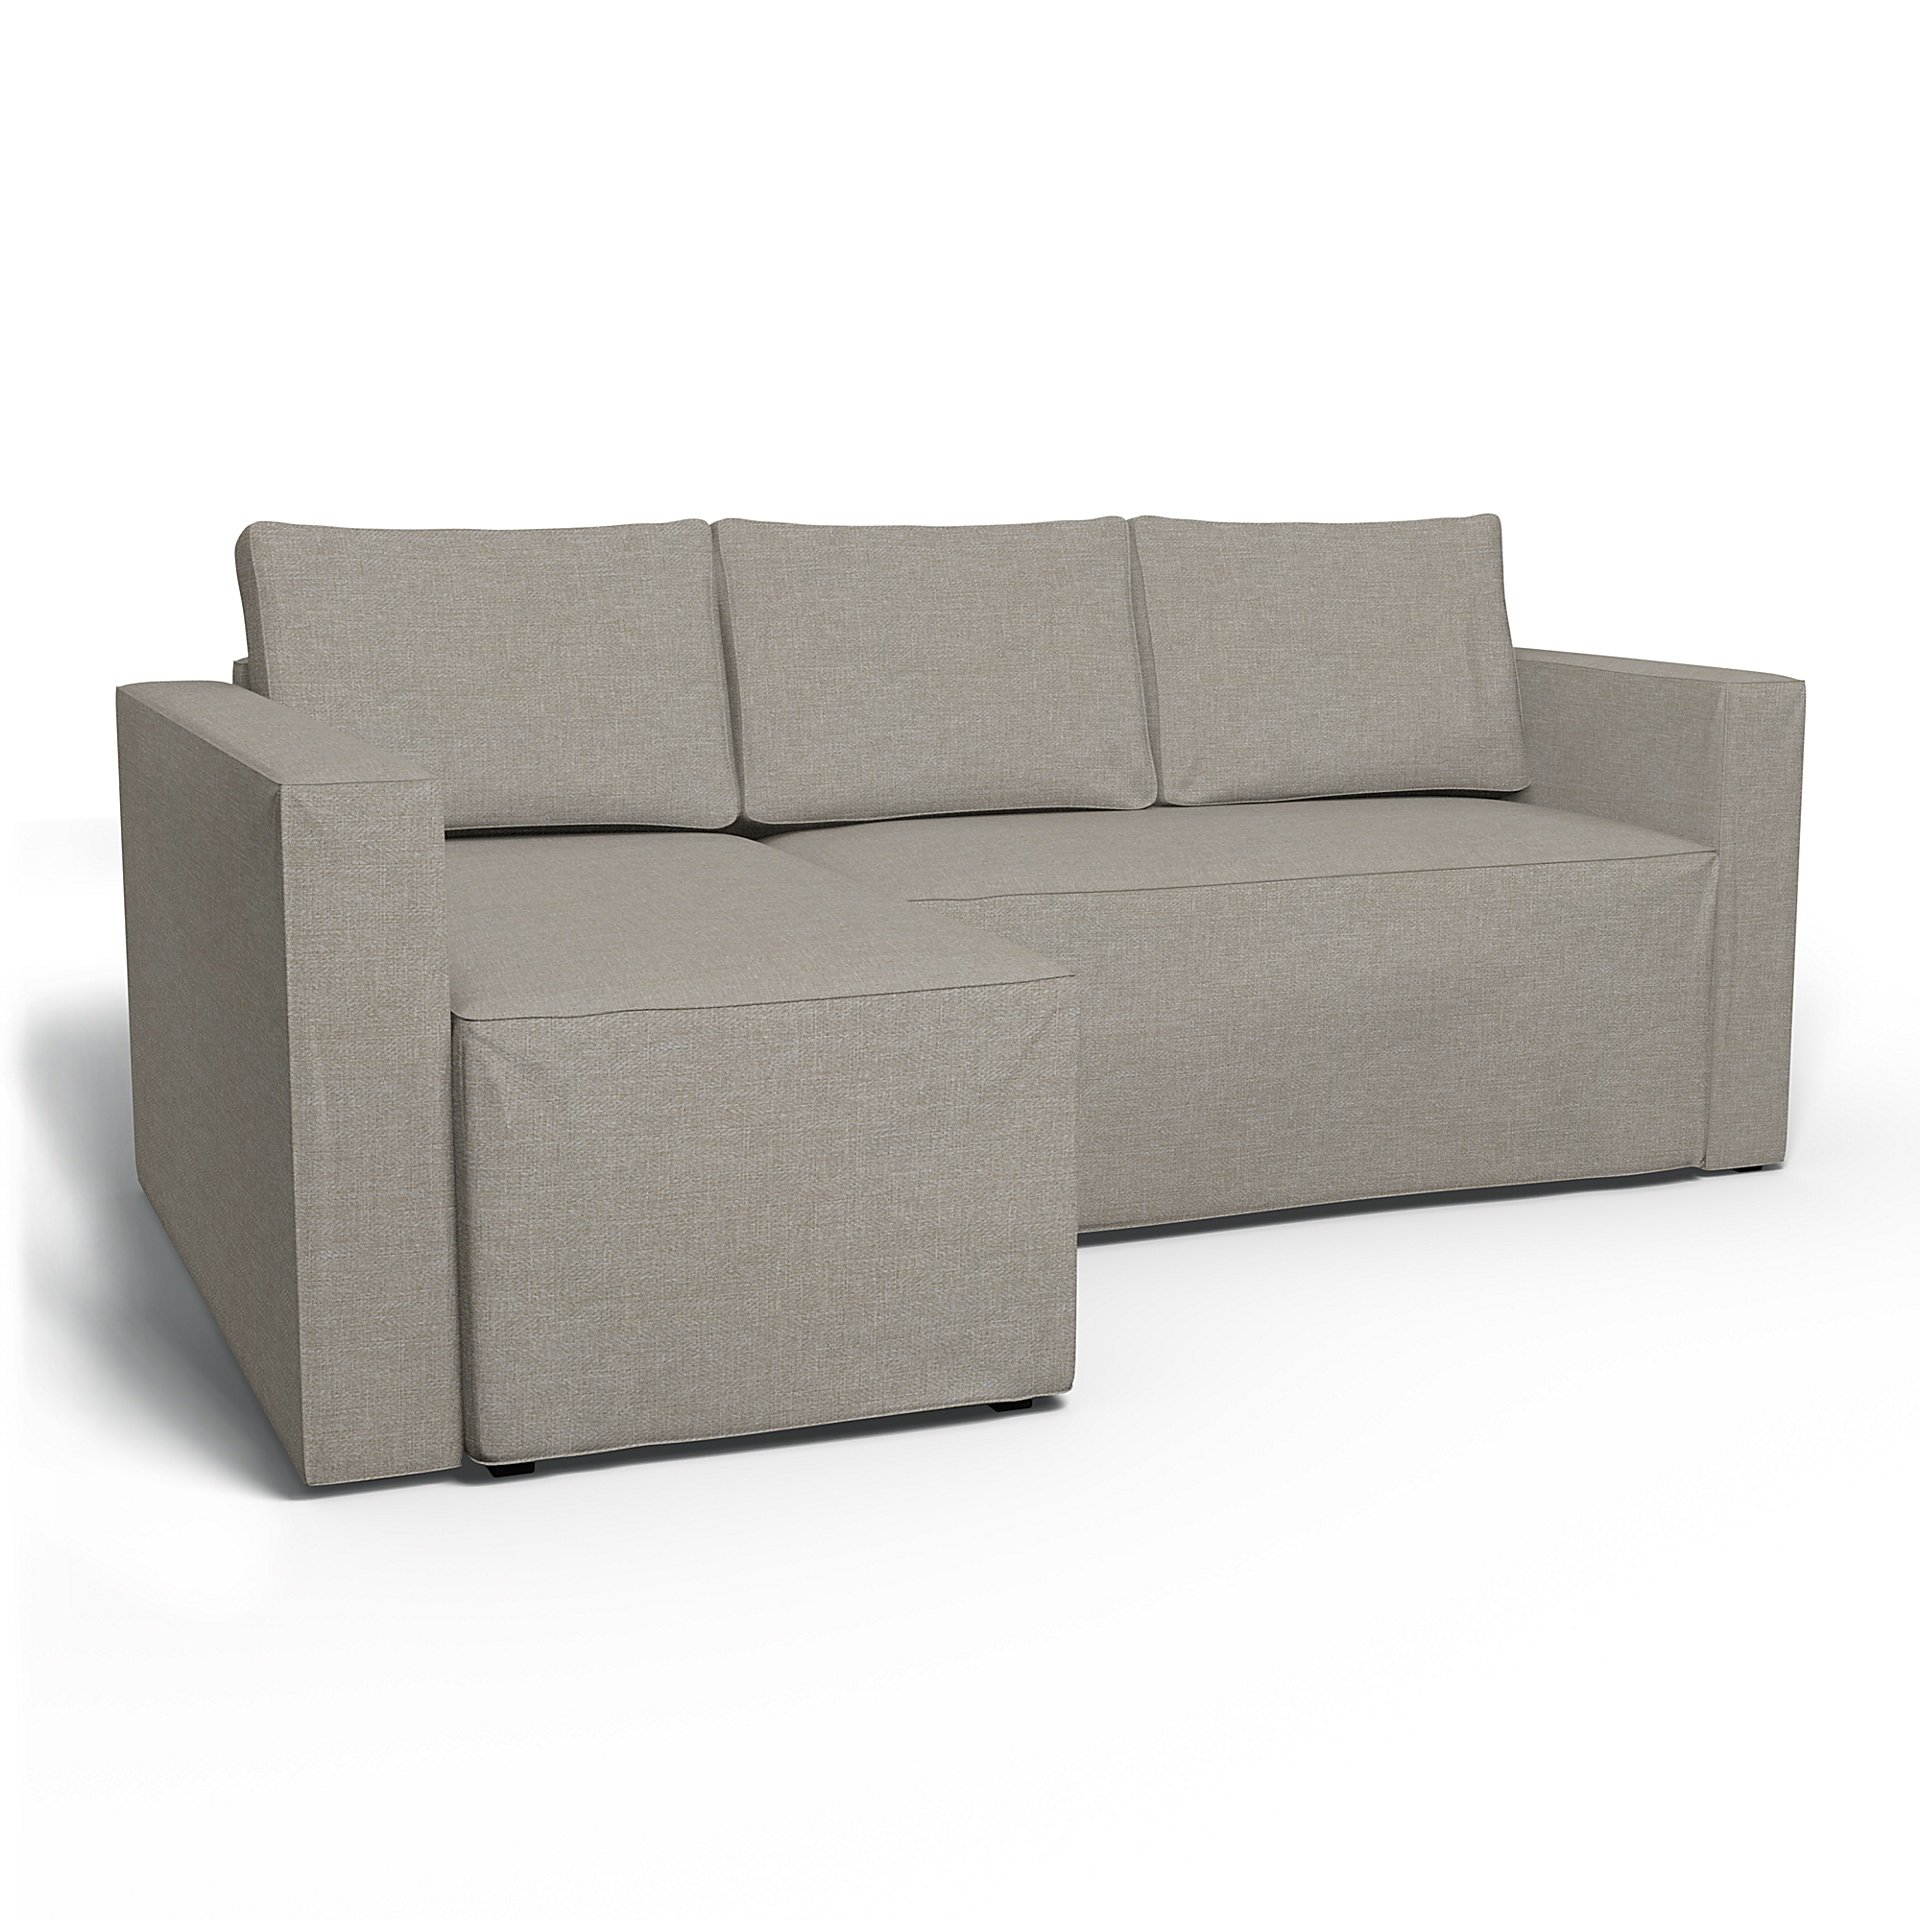 IKEA - Manstad Sofa Bed with Left Chaise Cover, Greige, Boucle & Texture - Bemz